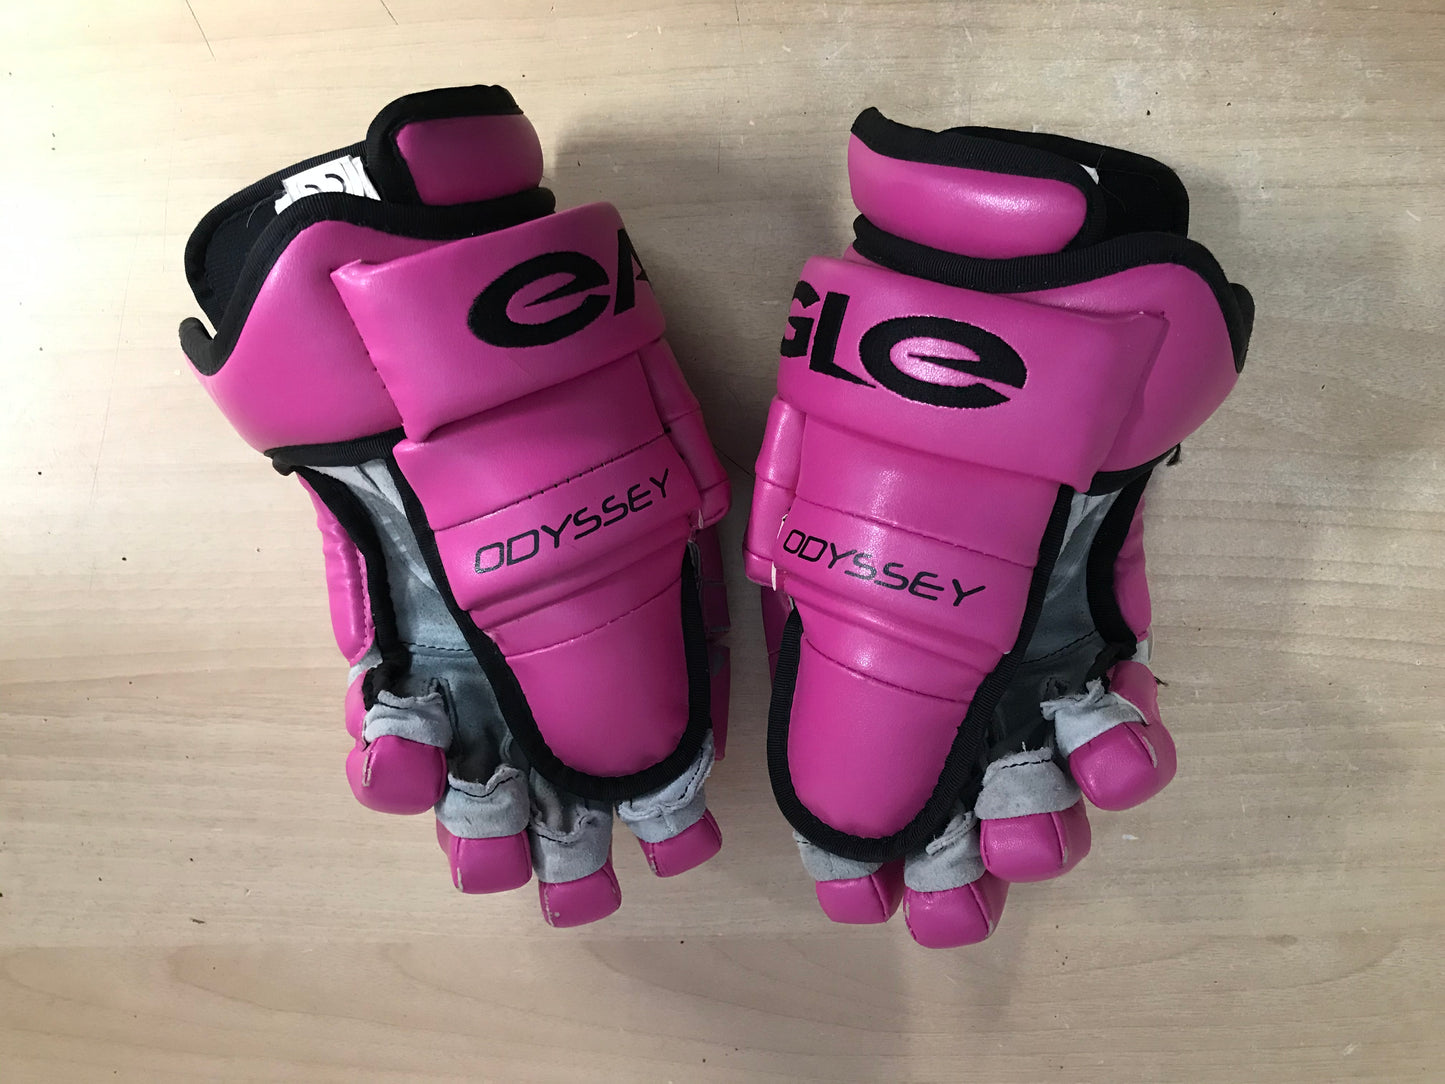 Hockey Gloves Ladies Size 13 inch Easgle Odyssy X4 Pink Outstanding Quality